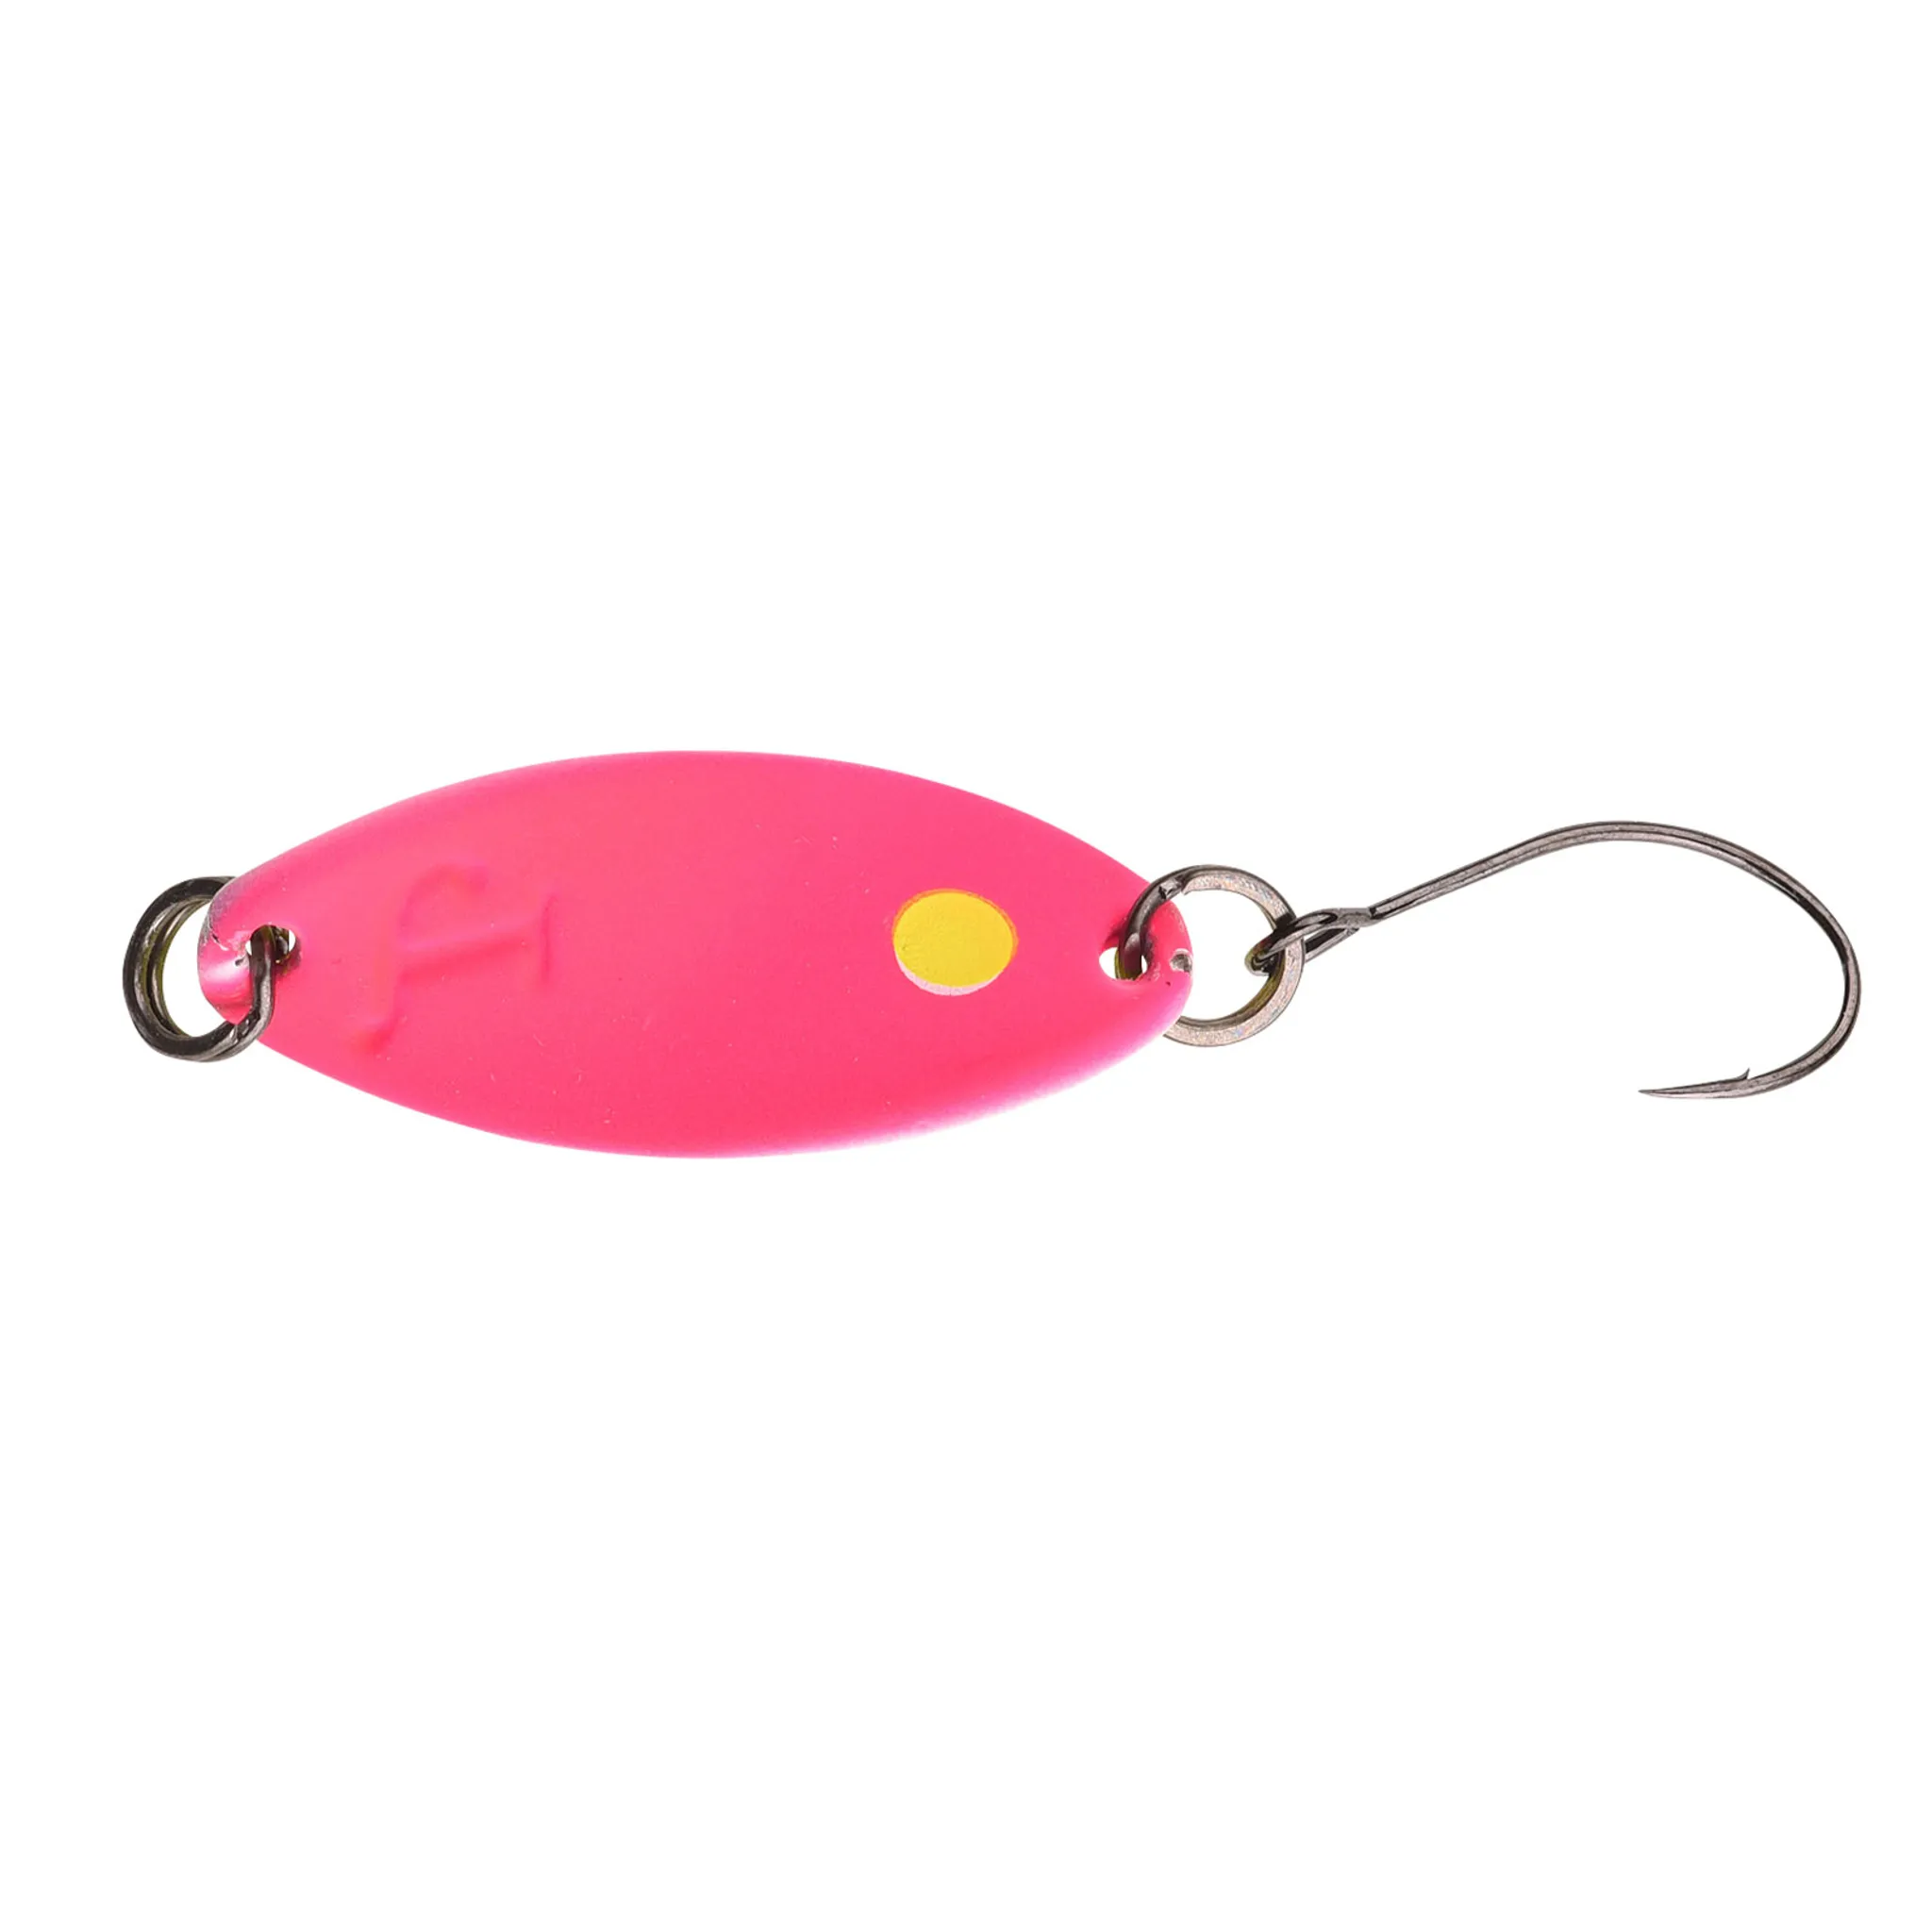 Paladin Trout Spoon III 3,6g rainbow trout / silver